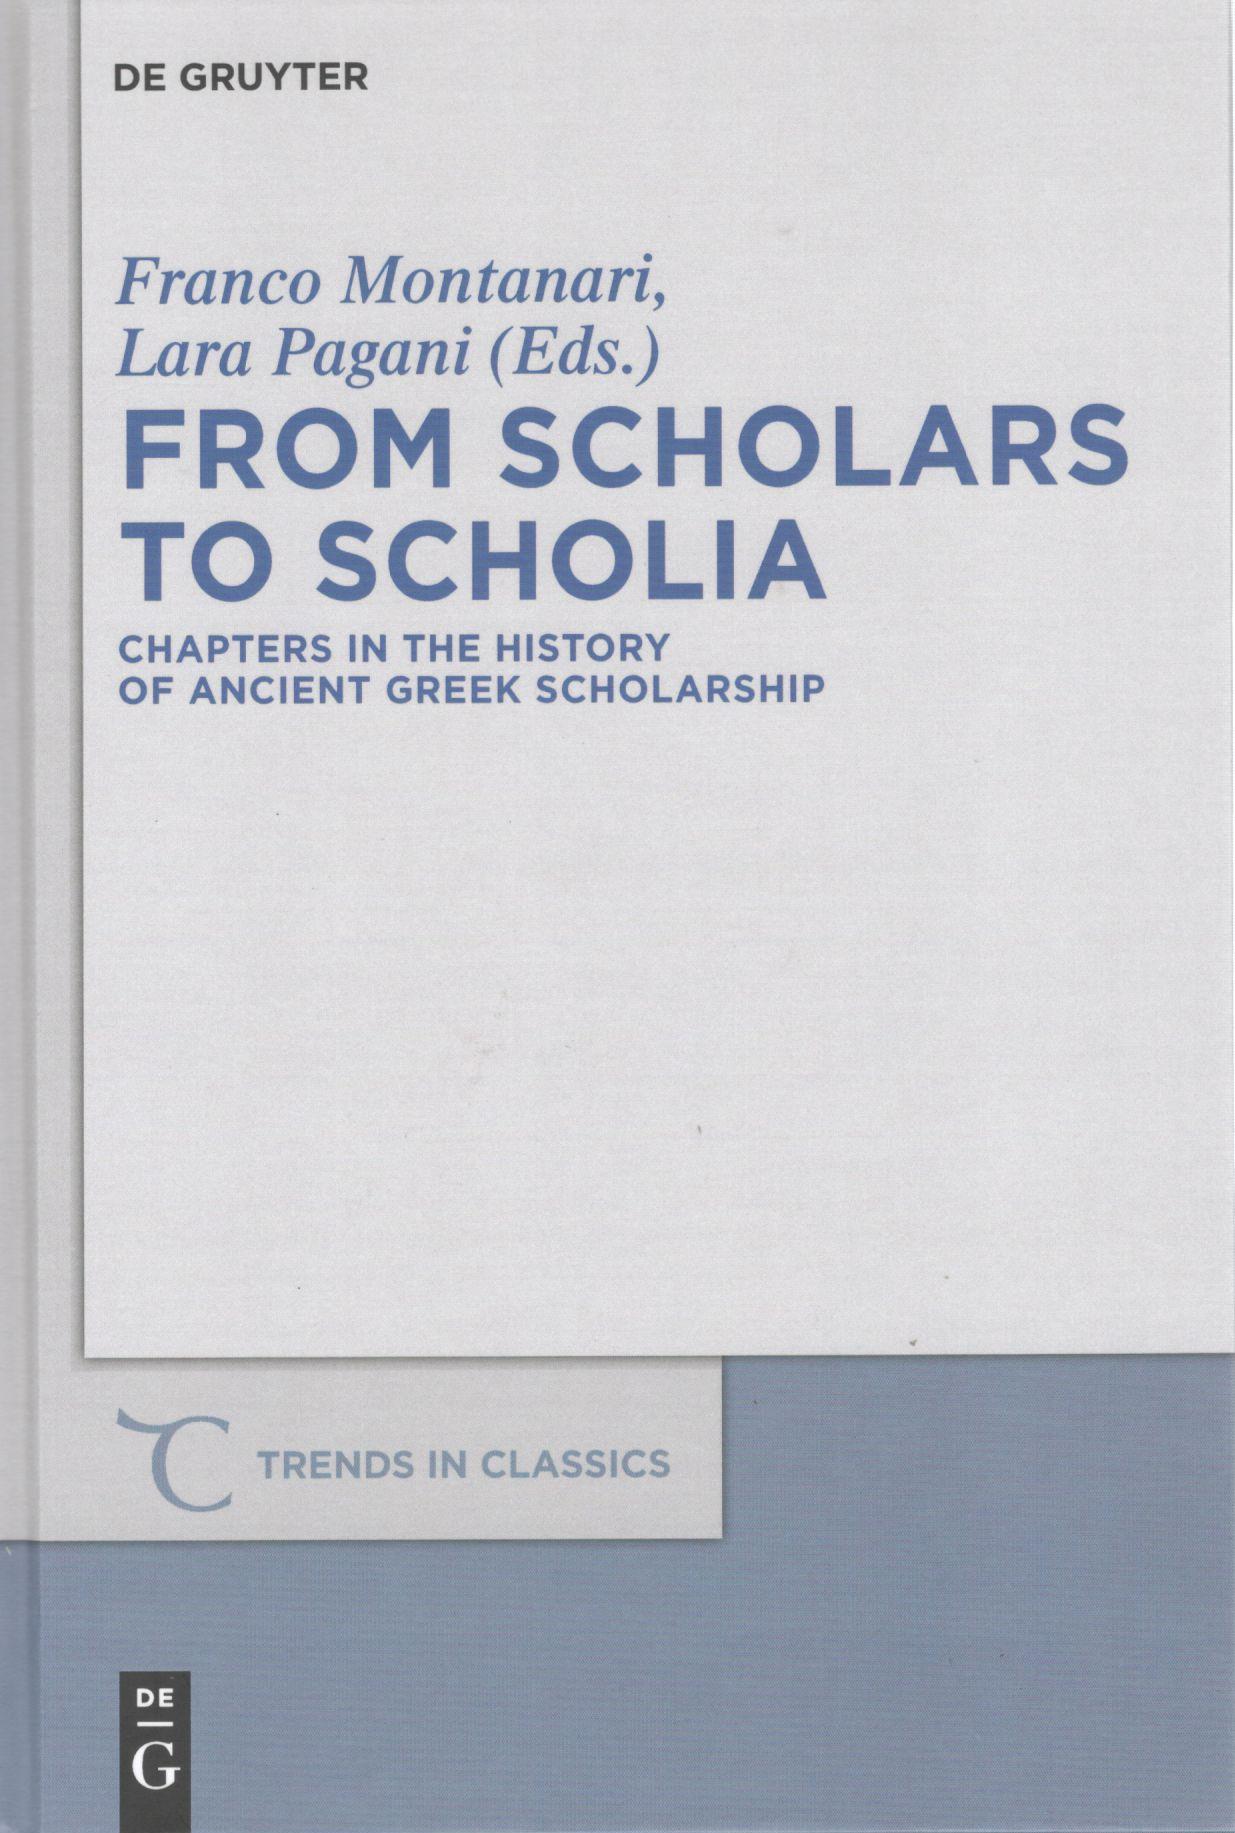 FROM SCHOLARS TO SCHOLIA